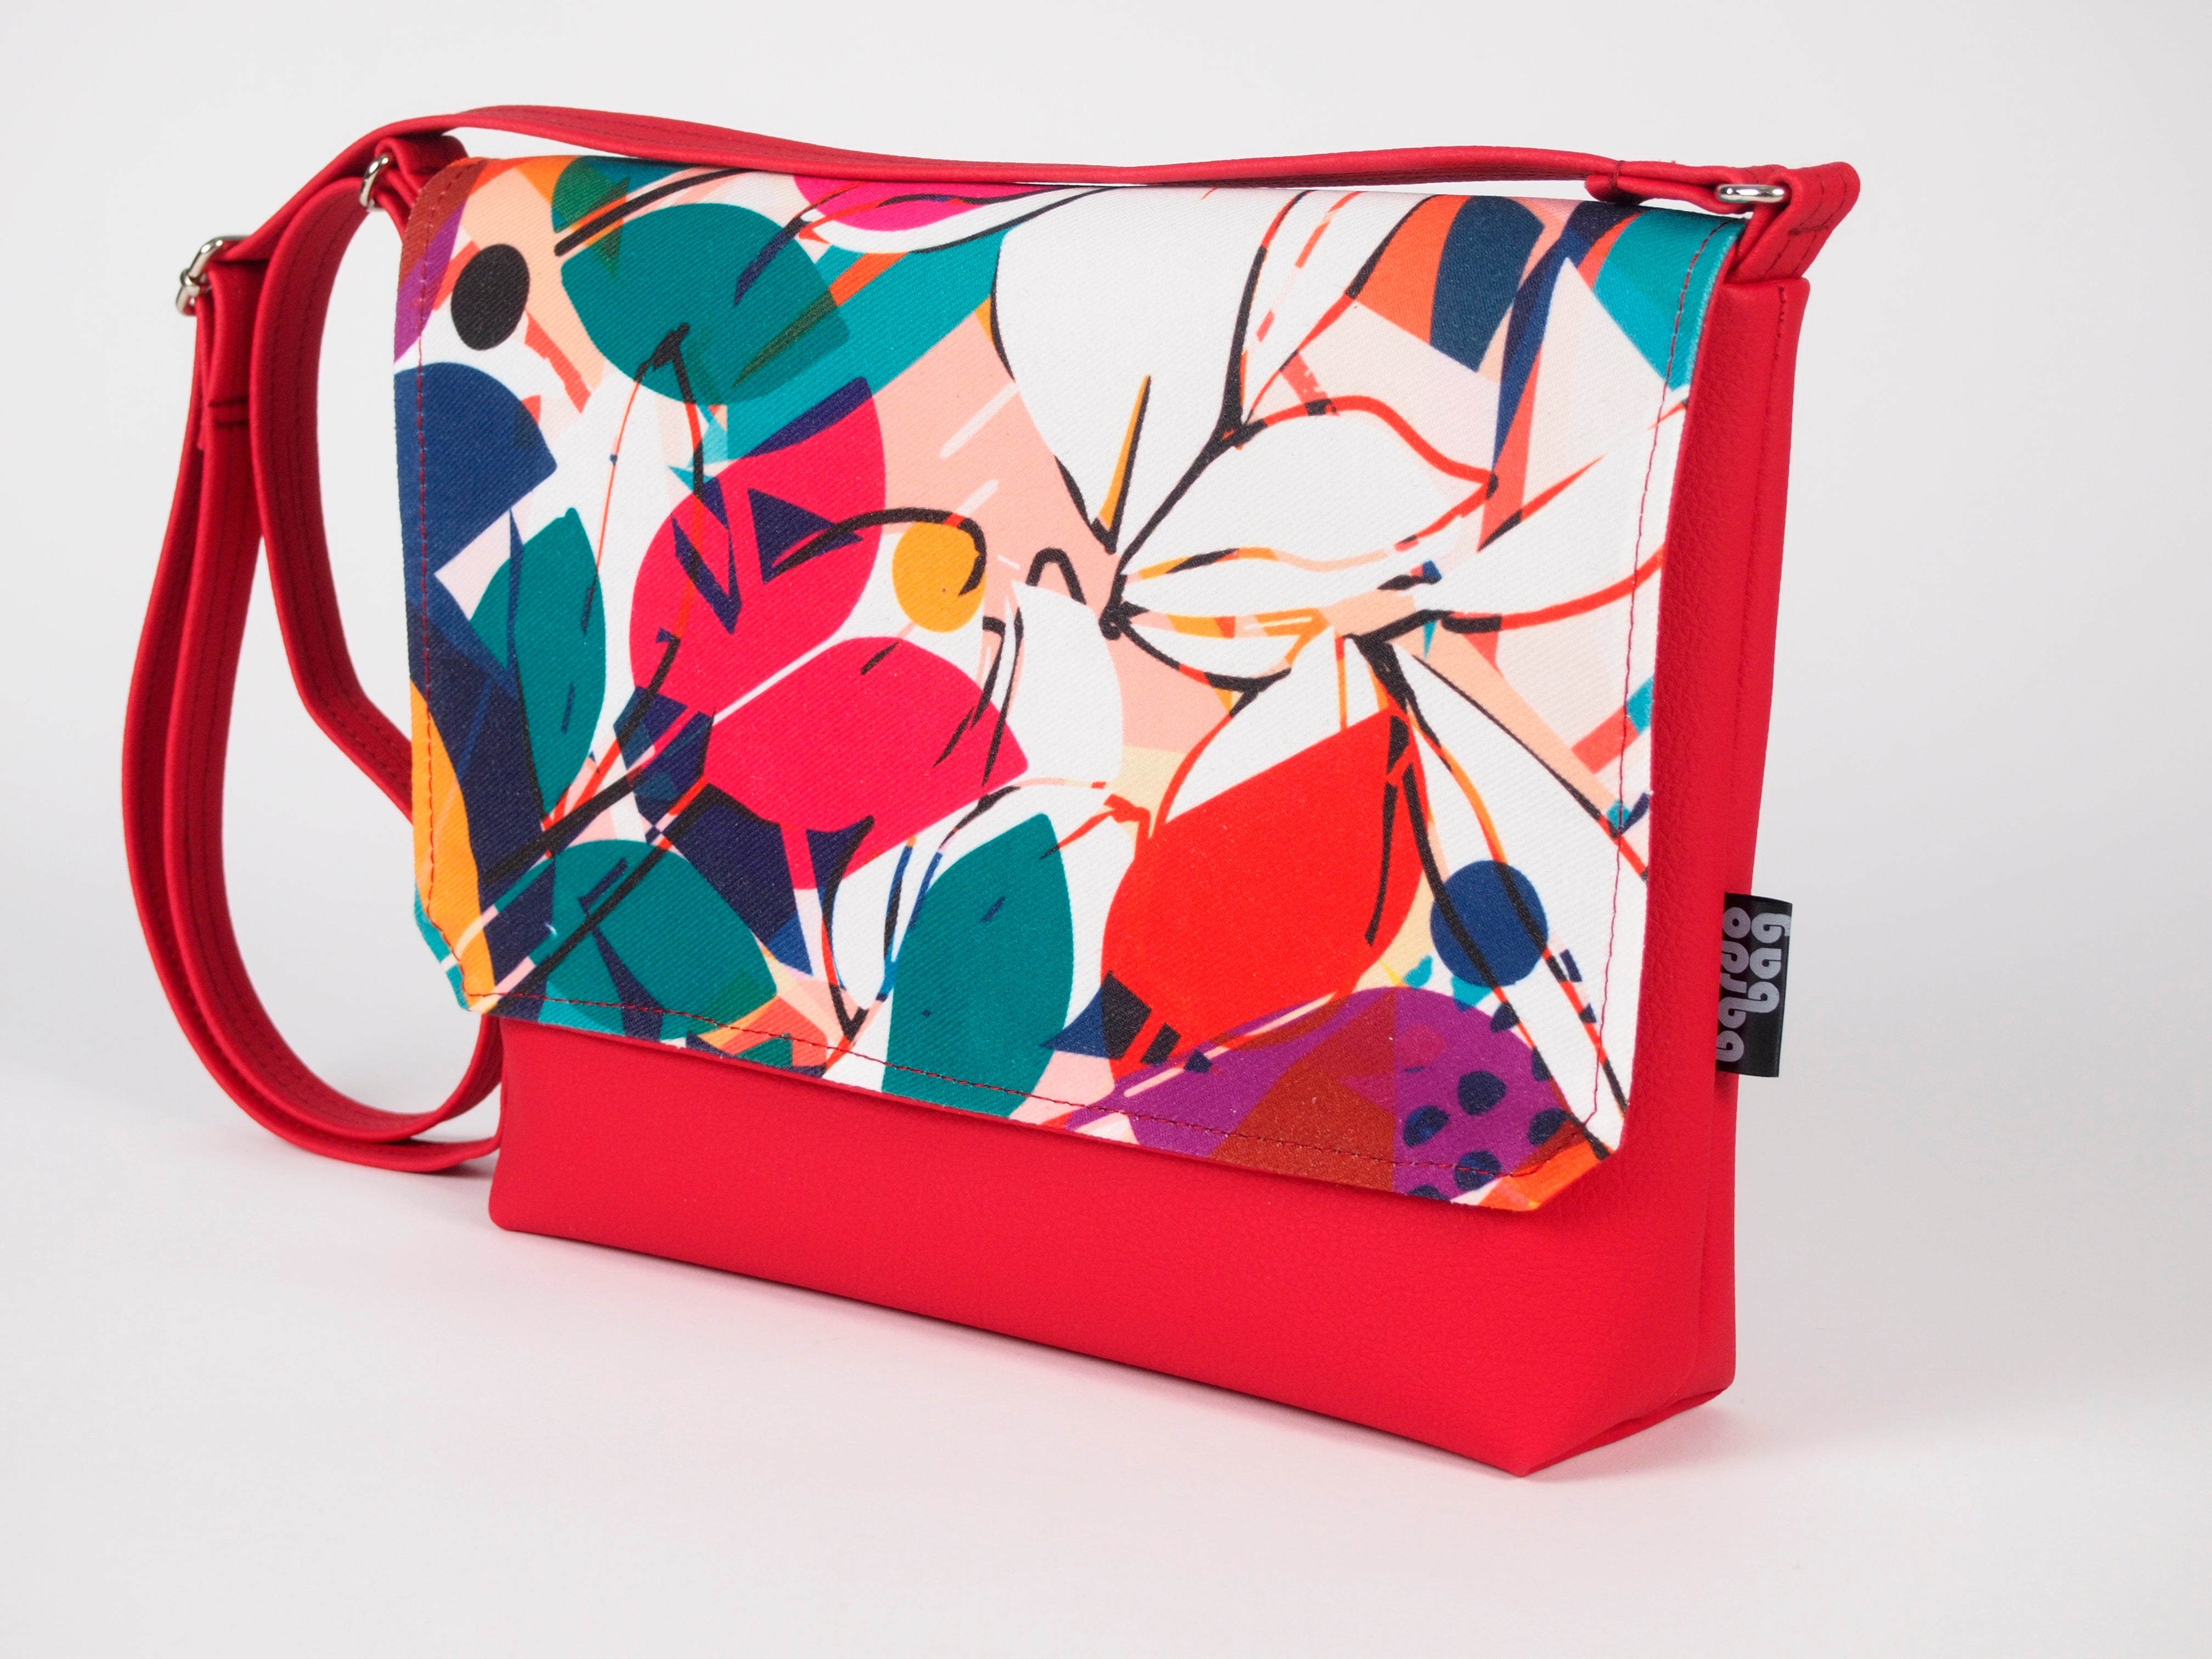 Bardo small bag - Queen of Flowers - Premium Bardo small bag from Bardo bag - Just lvblack, floral, flower, gift, green, handemade, orange, painted patterns, pink, purple, red, urban style, woman59.00! Shop now at BARDO ART WORKS